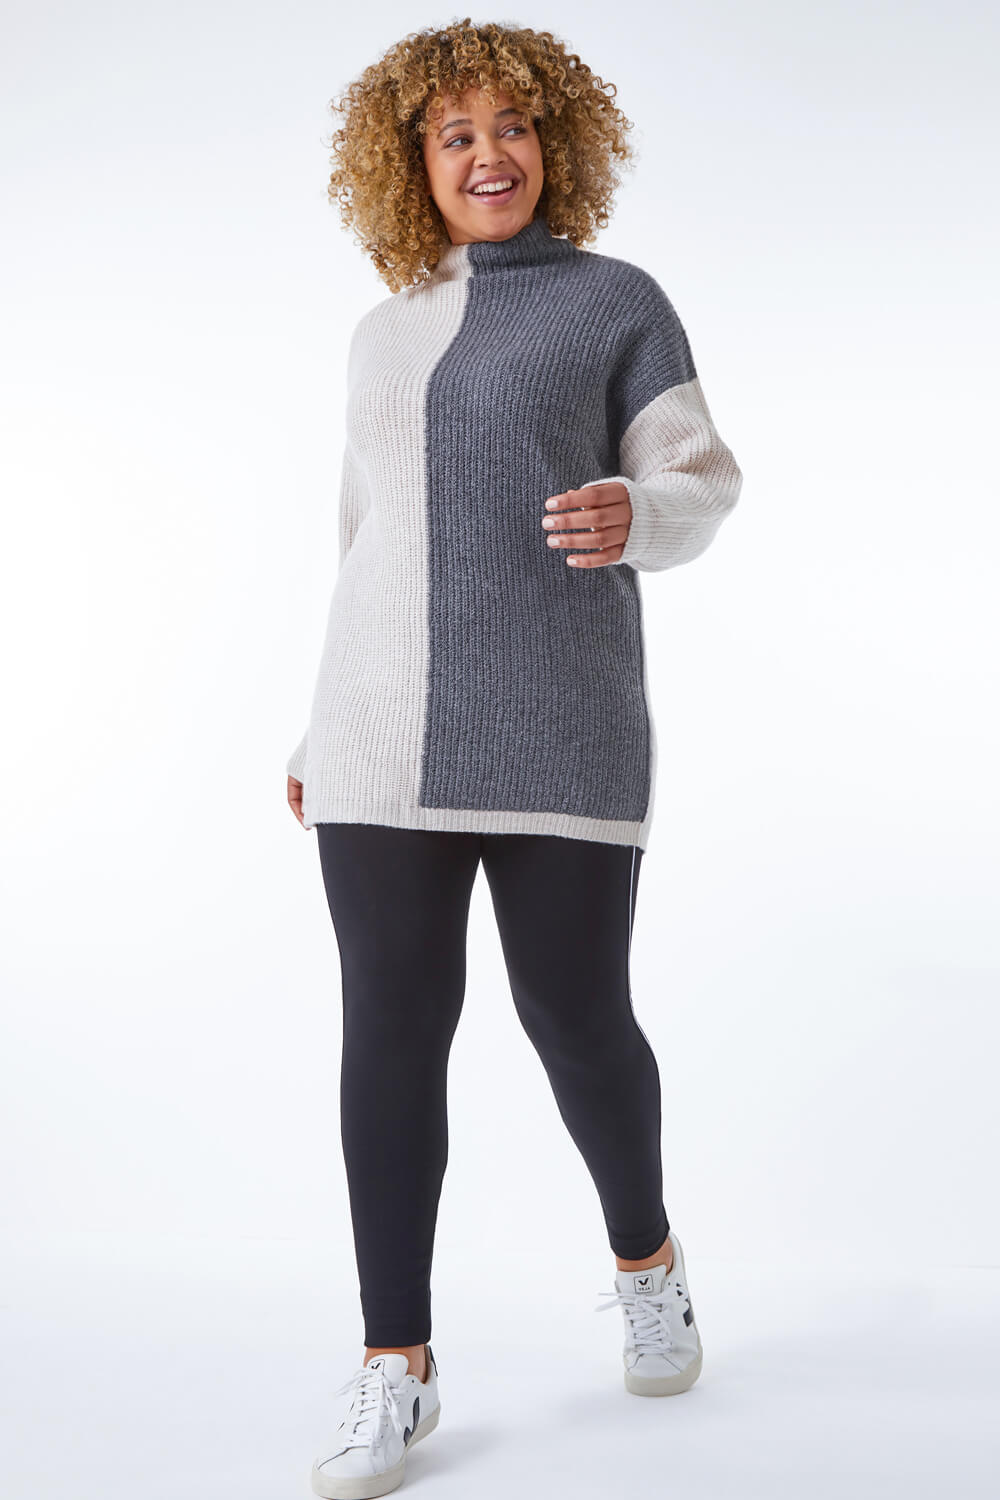 Grey Curve Colourblock Knitted Jumper, Image 4 of 5